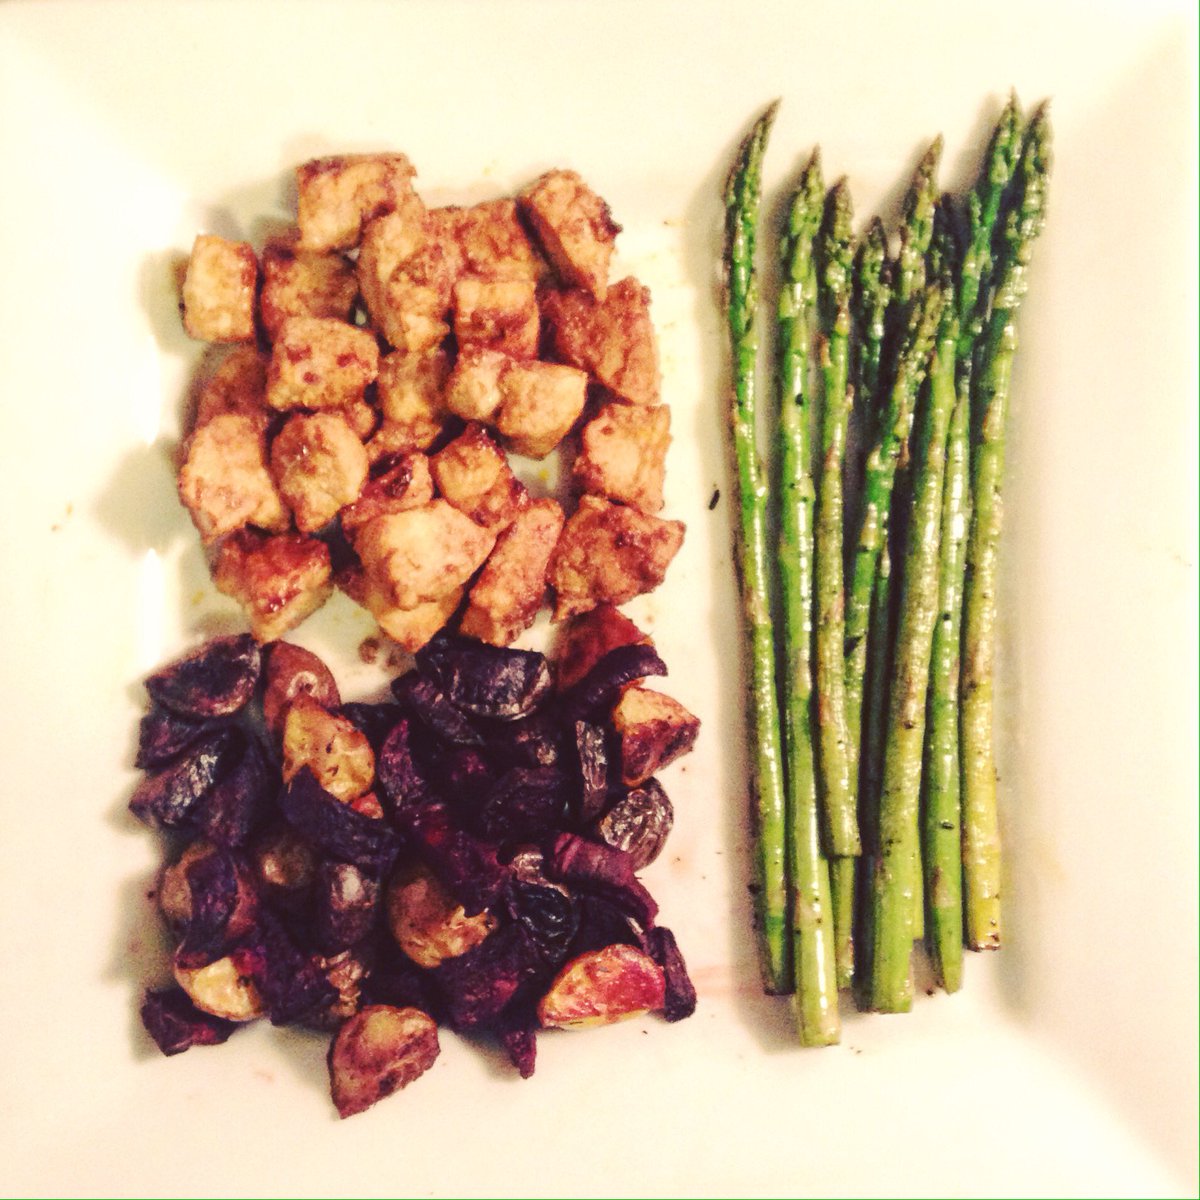 PROTEIN: pork chop, CARBS: #batchcooked roasted baby potatoes and beets VEGGIES: Asparagus. #balancedplate #eatclean #actualnutrition #rd2be